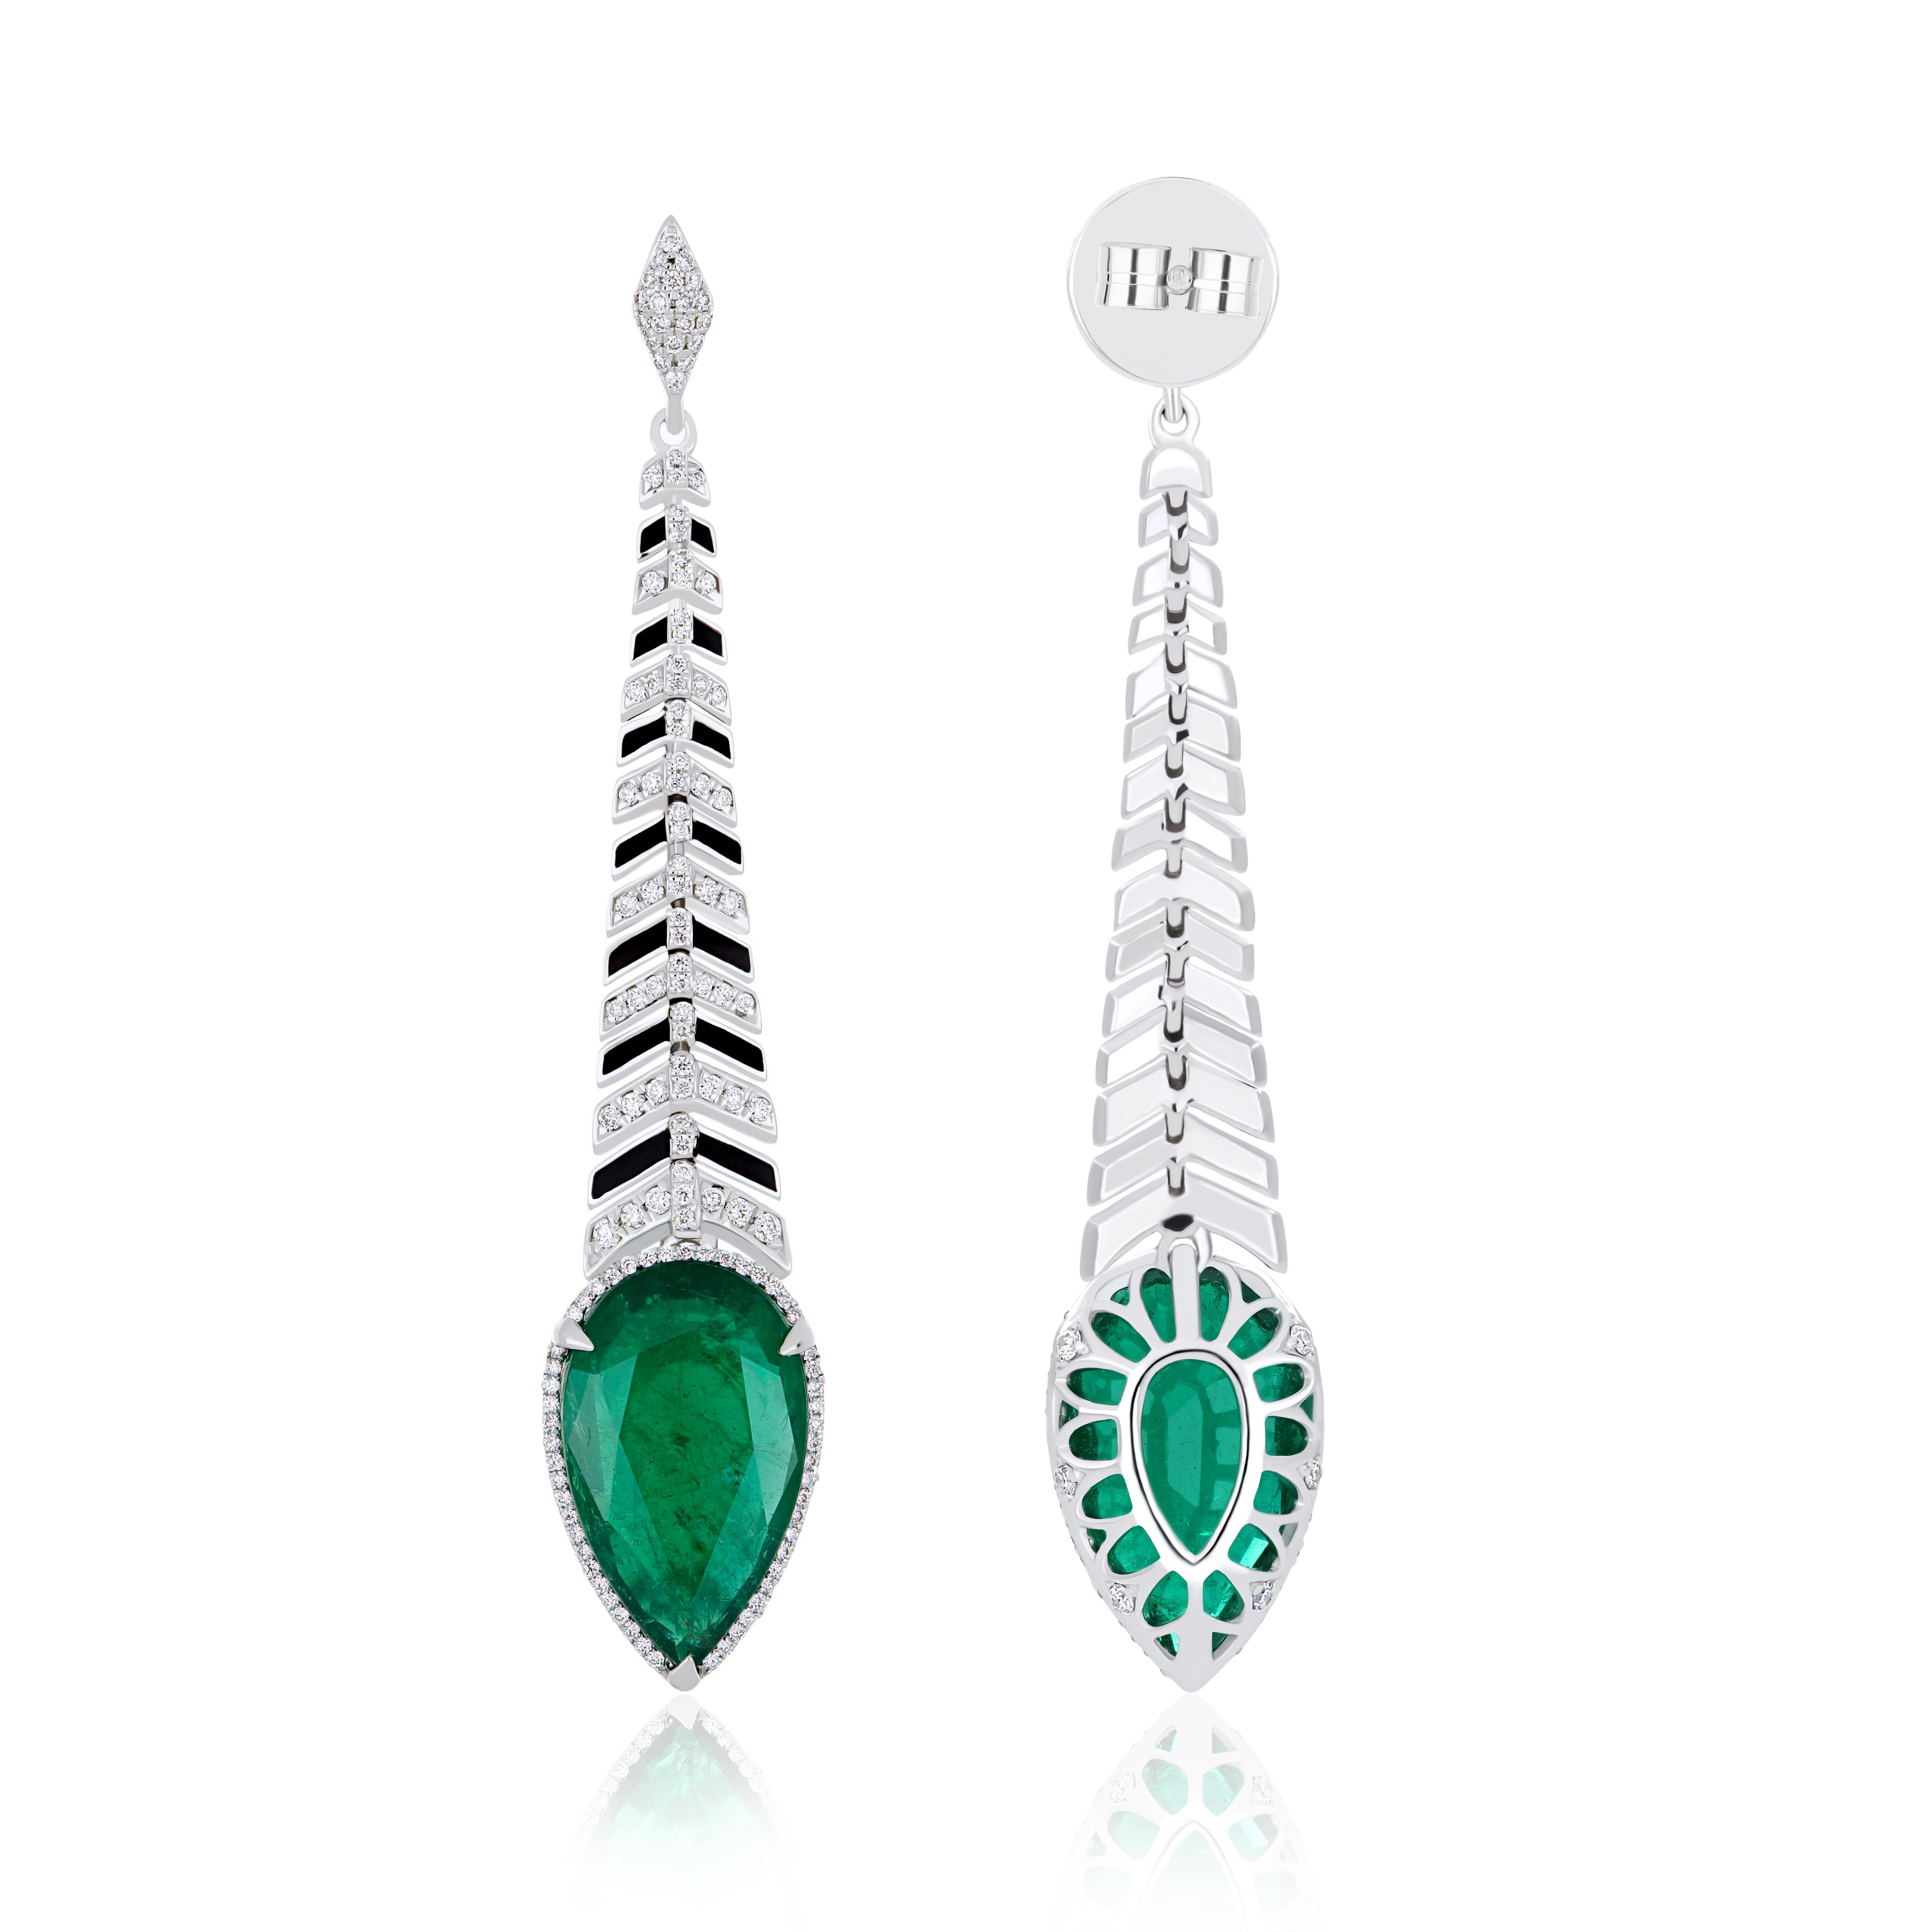 Elegant and Exquisitely Detailed 18 Karat White Gold Earring. Set with Pear Shape Emerald with approx. 9.1 Cts, and micro pave set Diamond with approx.  0.85 Cts, to further enhance the beauty contrasting Black Color Enamel is used to bring out the